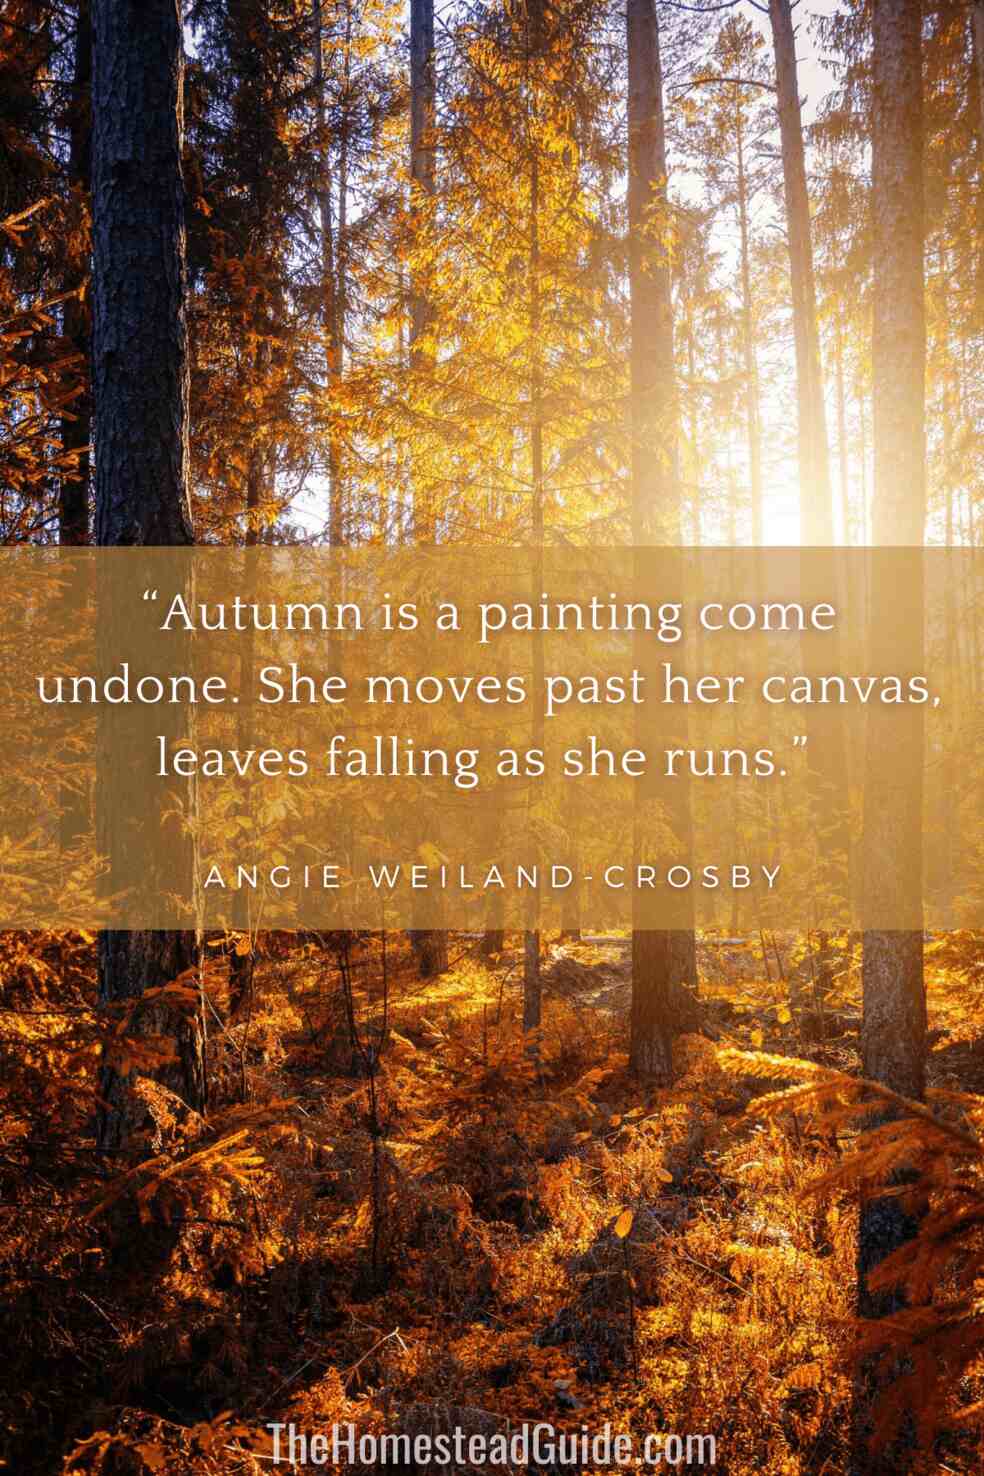 Autumn is a painting come undone. She moves past her canvas, leaves falling as she runs.